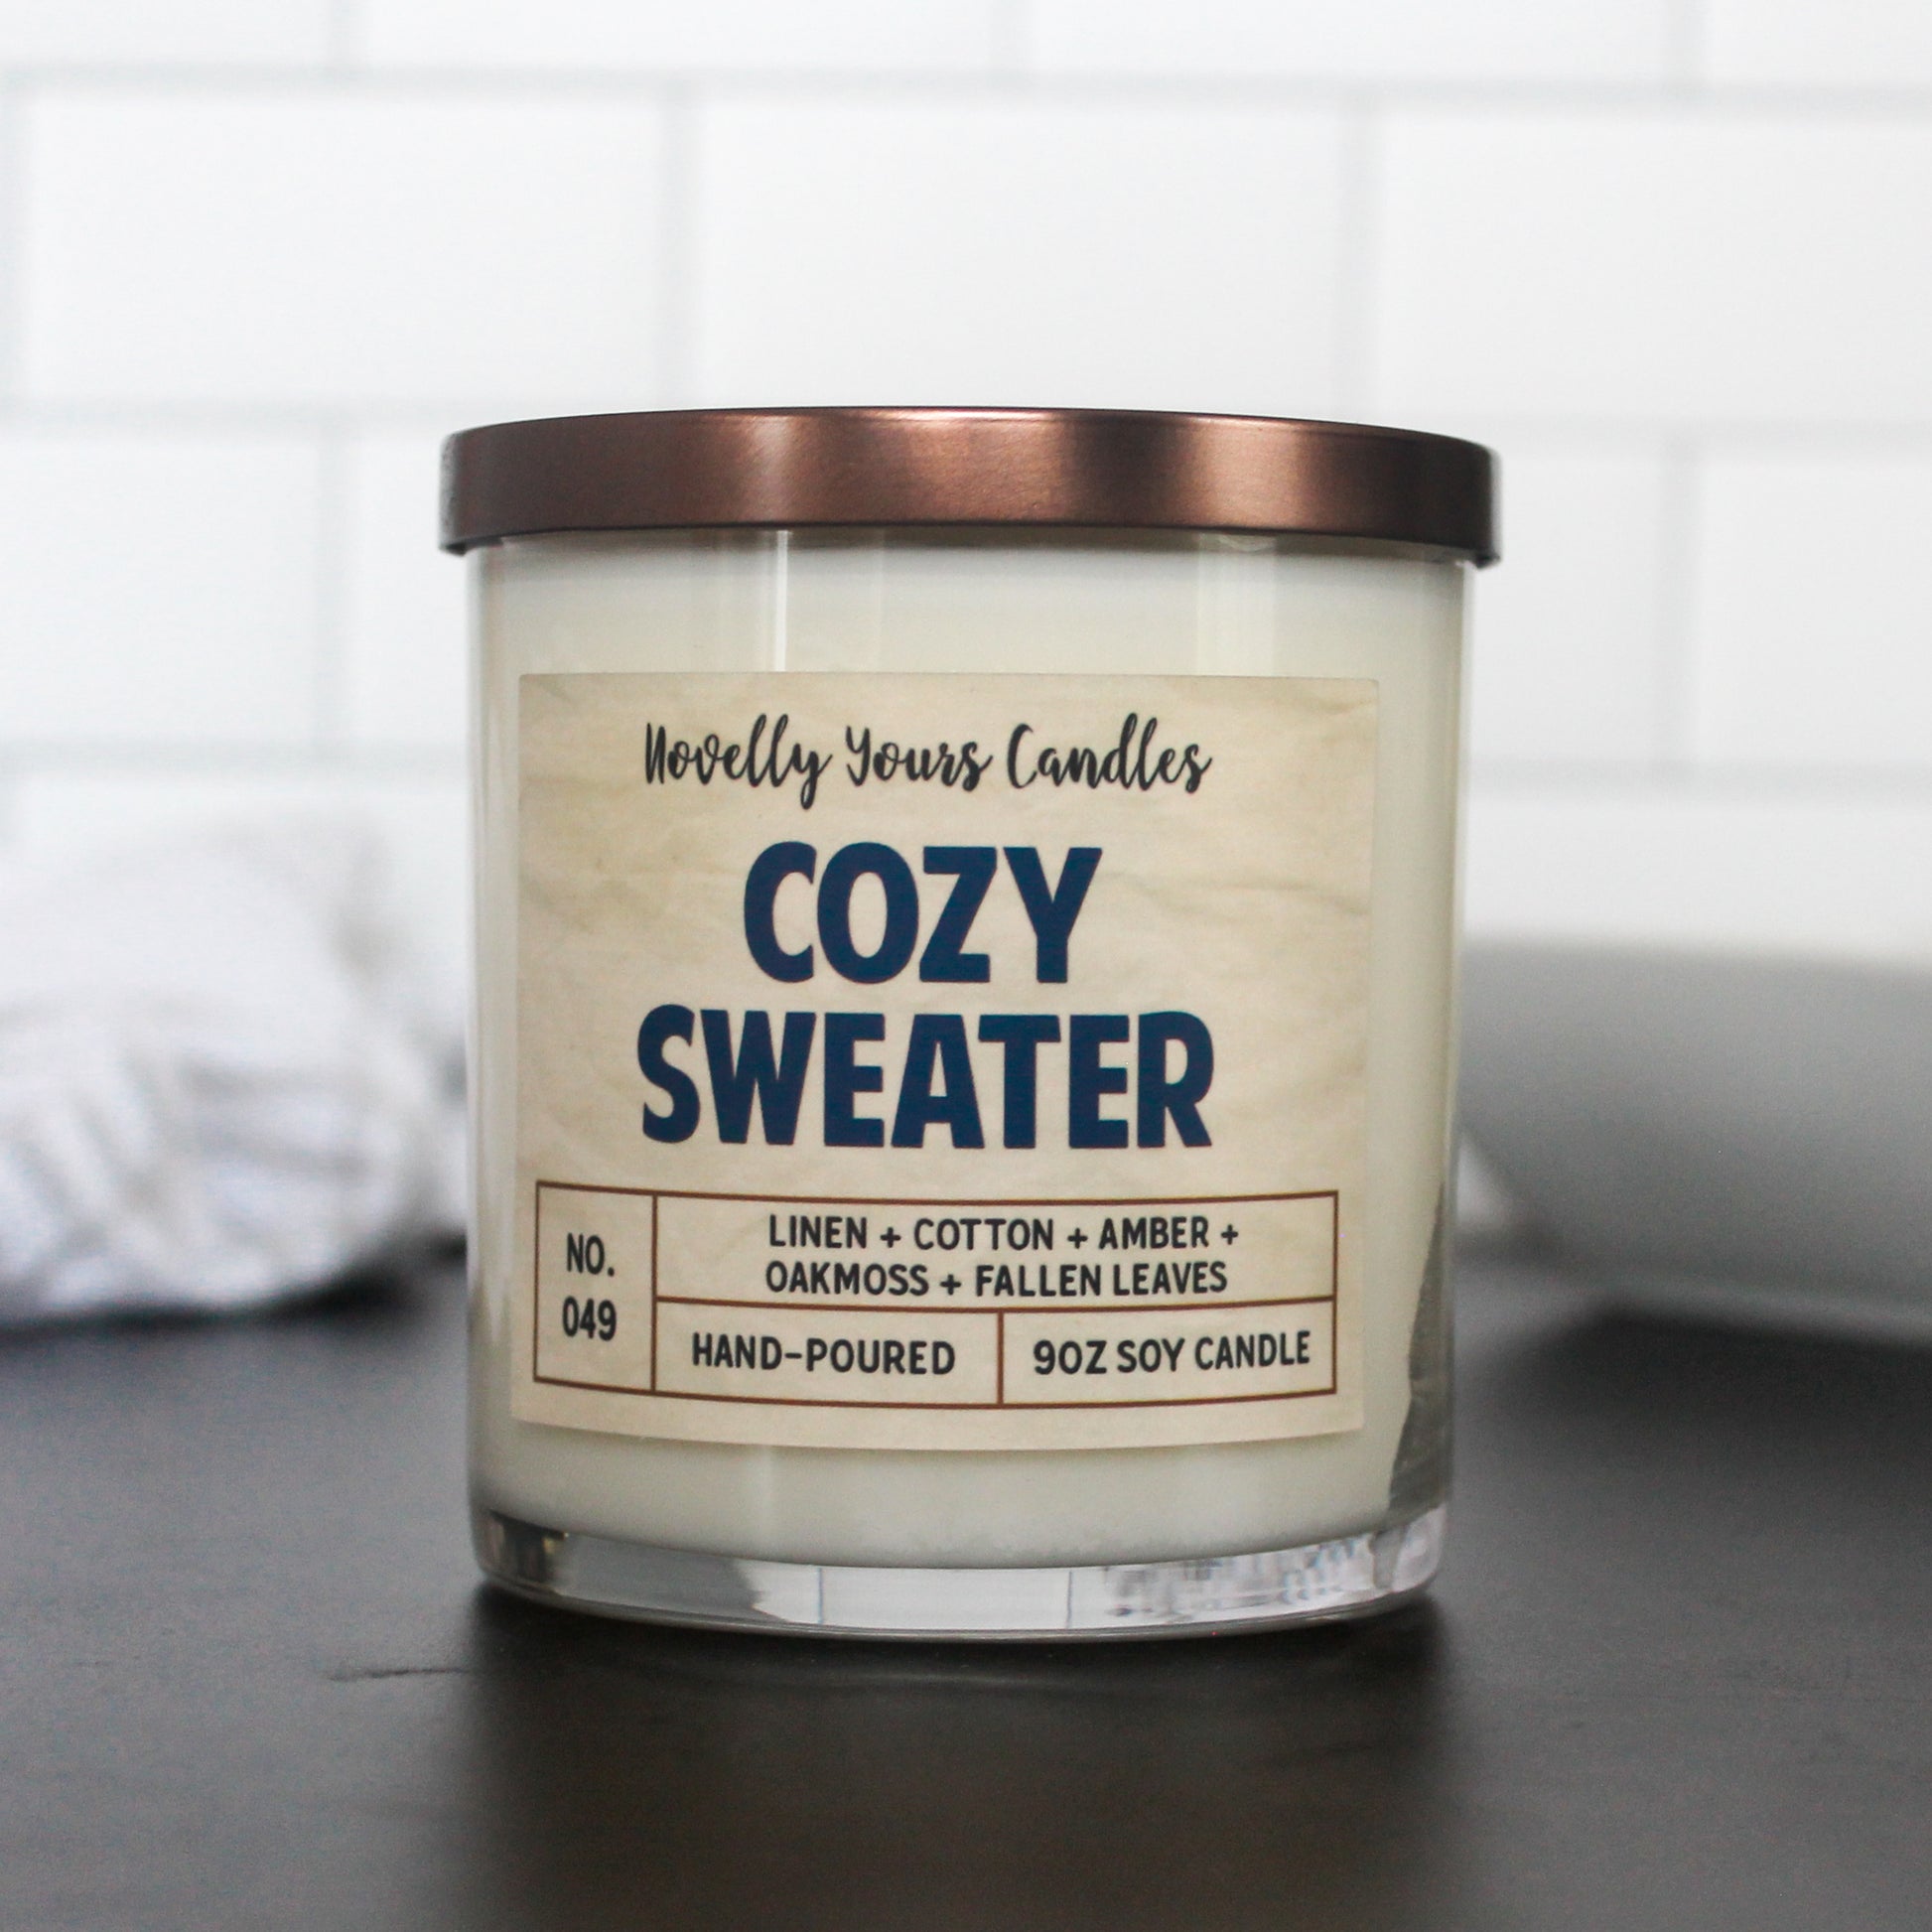 cozy sweater named candle with title in navy blue color. candle sits on black counter with white tile background